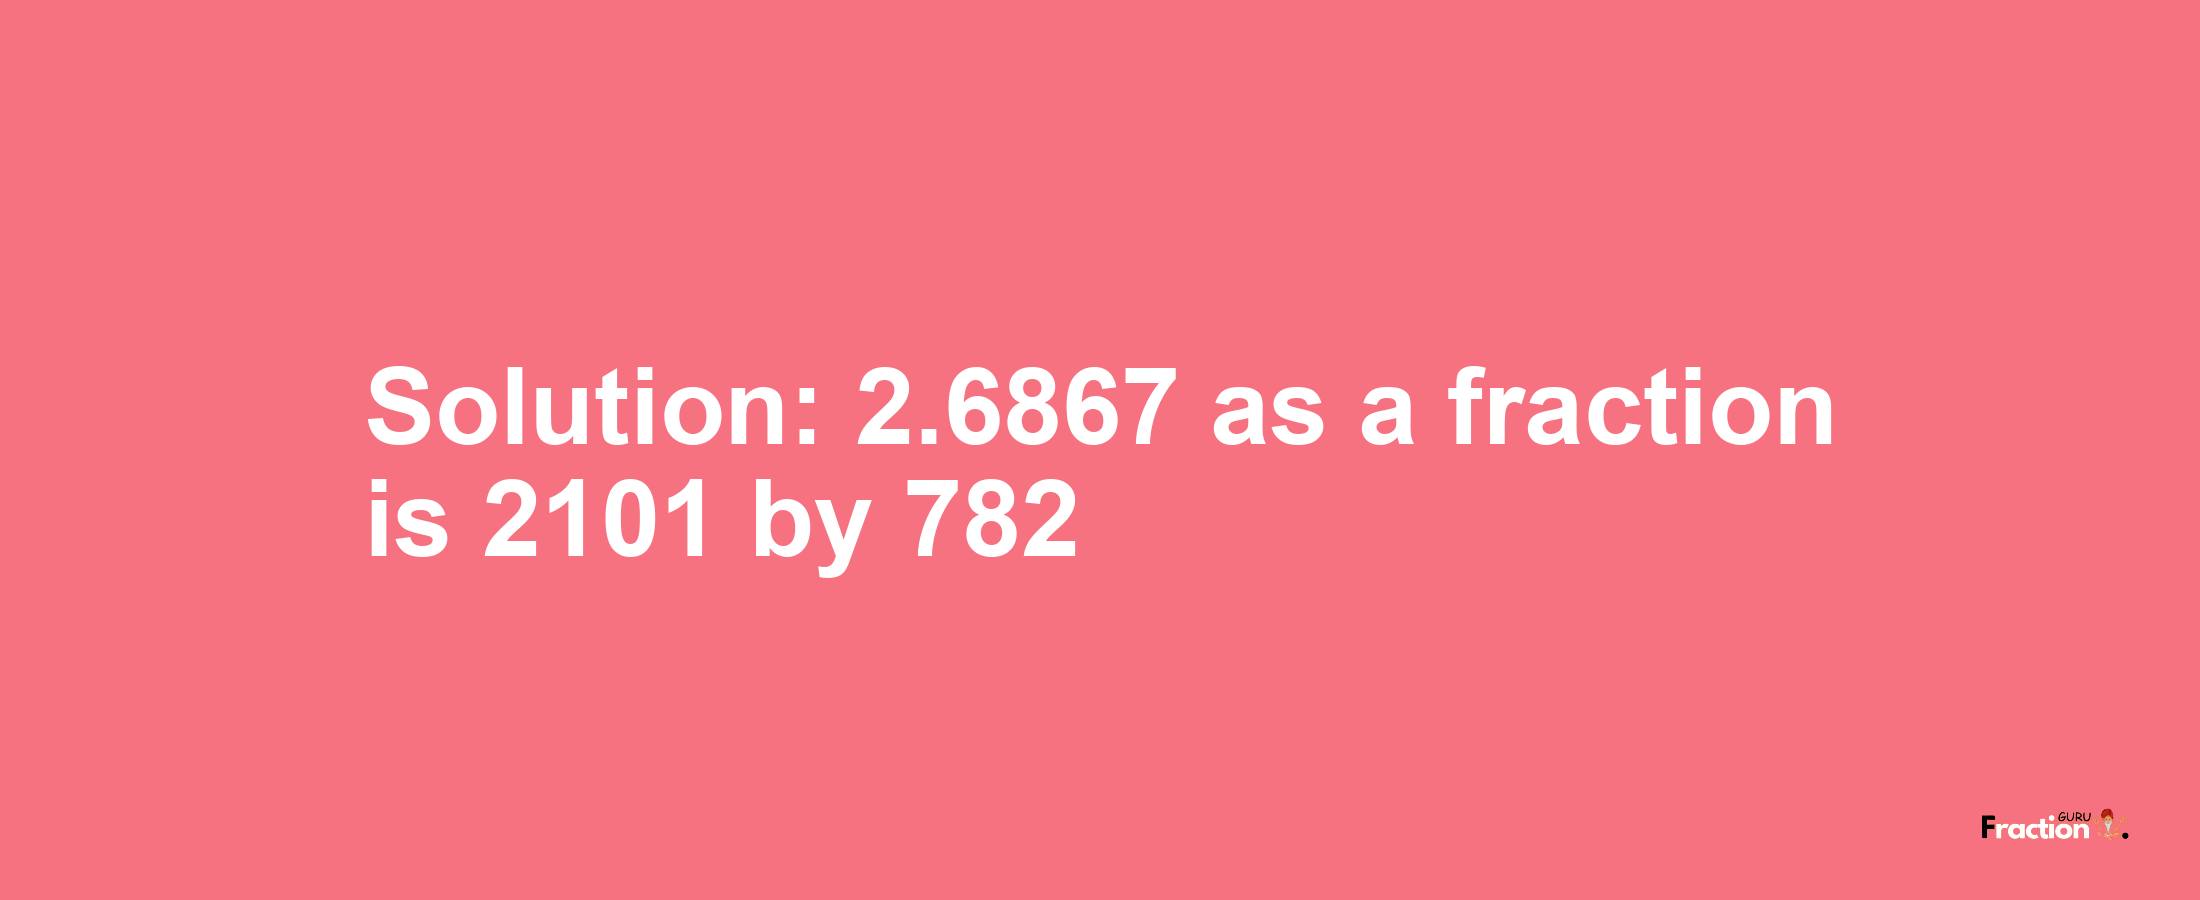 Solution:2.6867 as a fraction is 2101/782